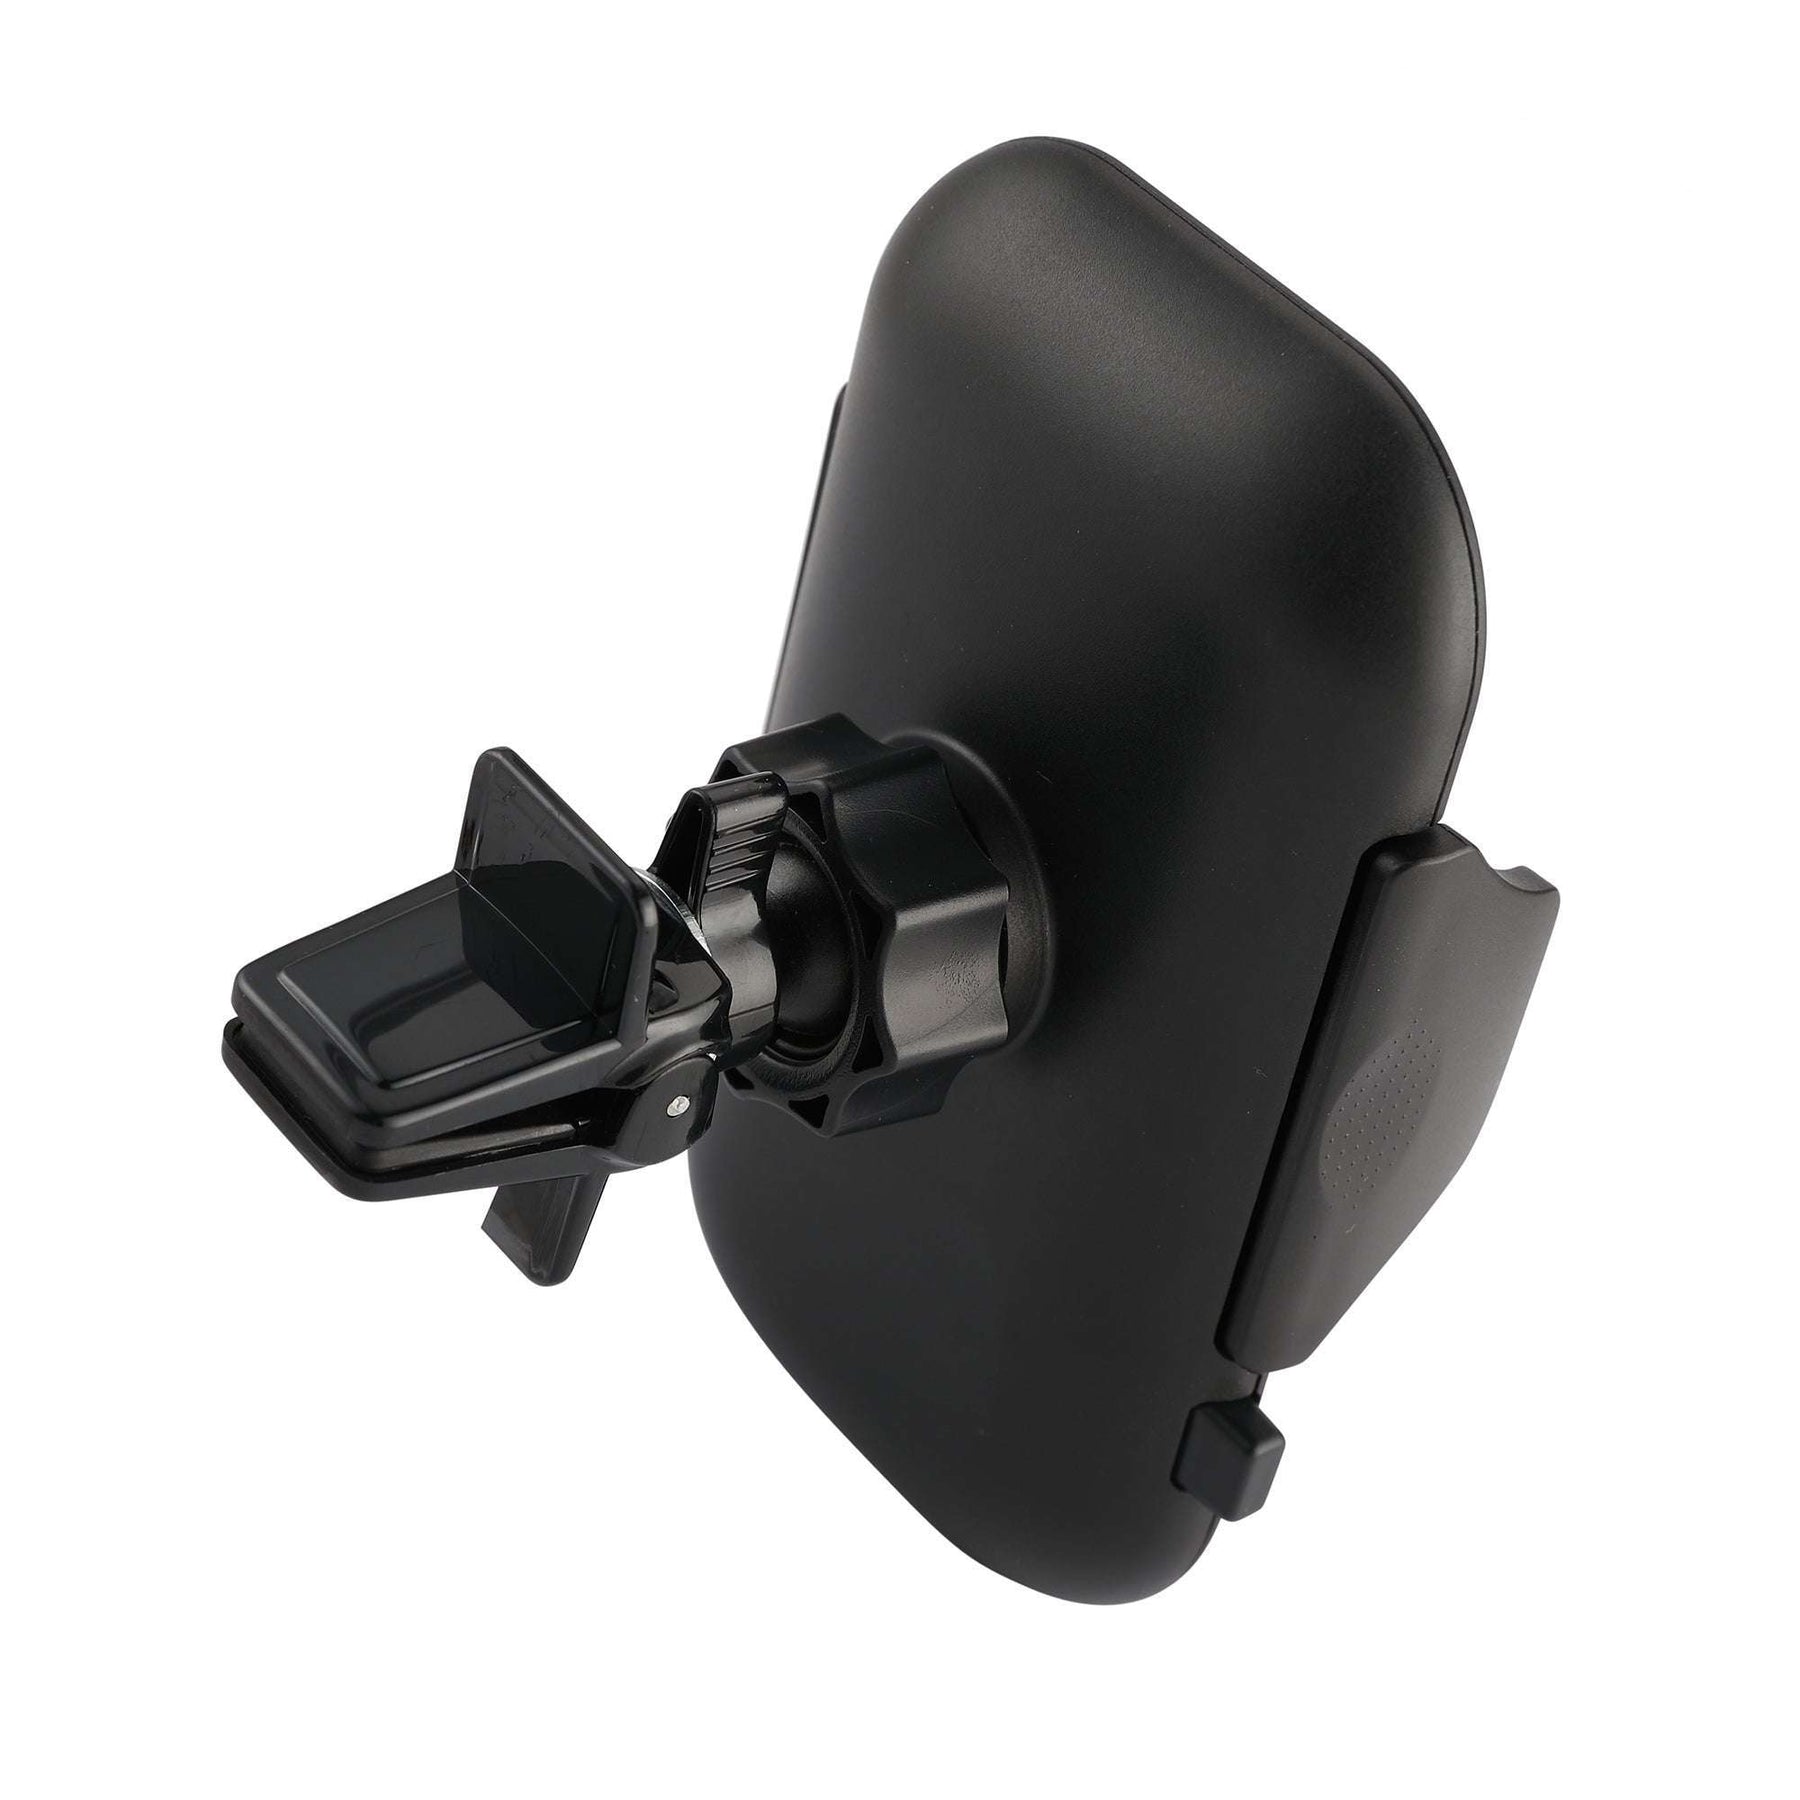 Premium Cradle-Type Car Mount with Air Vent Clip, Adjustable Side Jaws & Silicone Pad